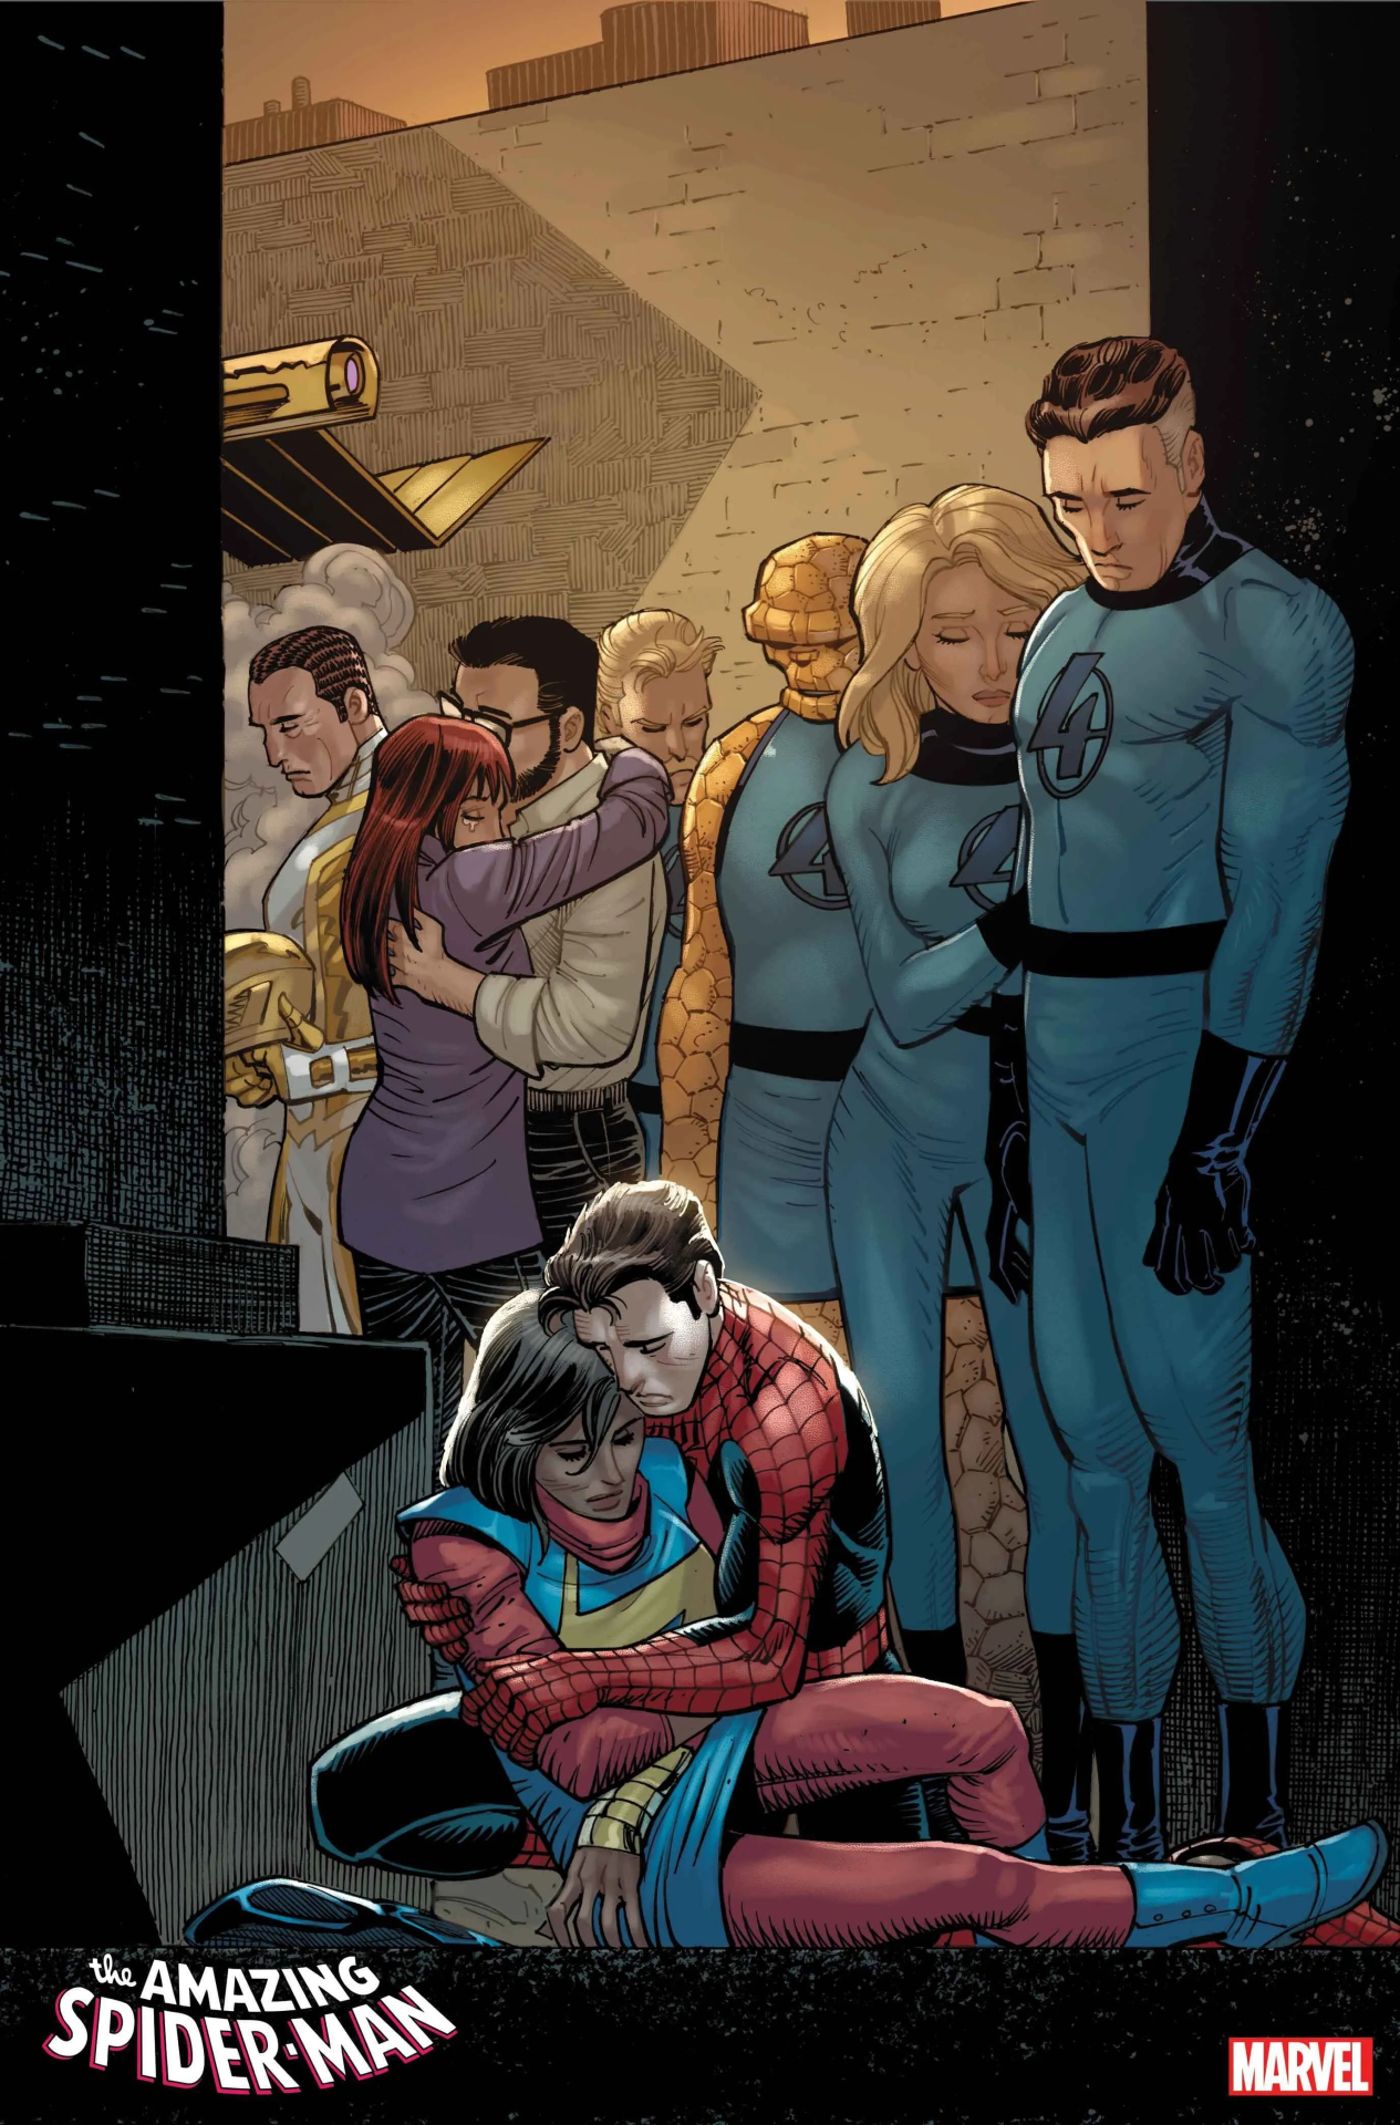 Ms. Marvel’s Death Could Be Undone Sooner Than Expected – By The X-Men